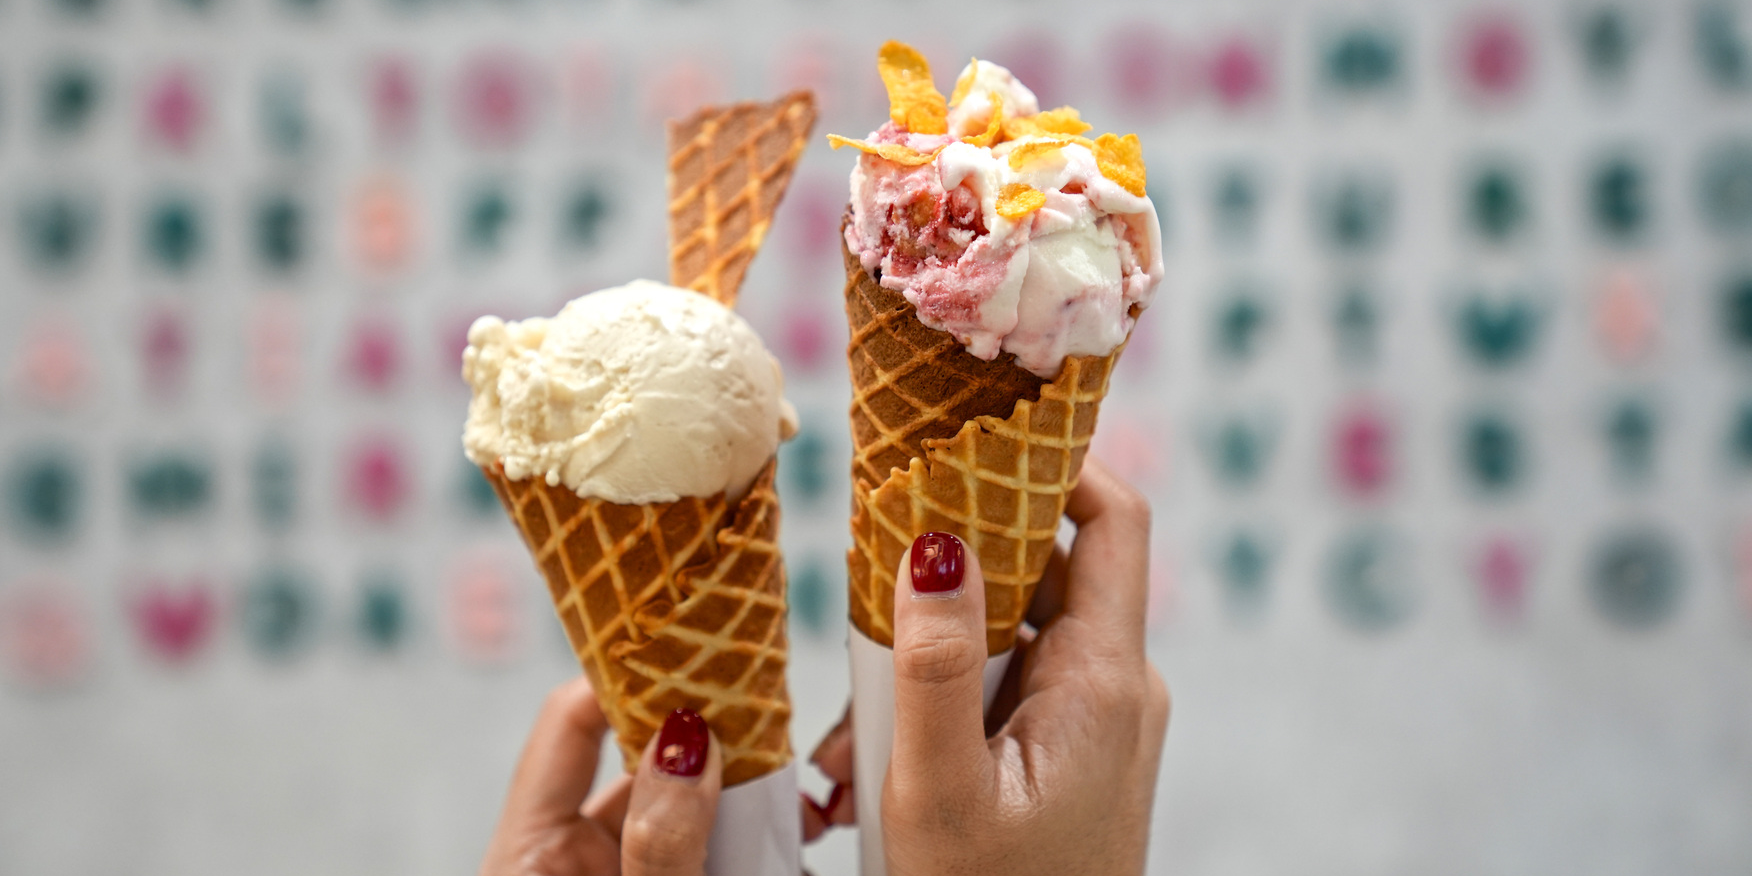 Beat the Singapore heat this National Day with GelatiAmo’s classic double scoop at only $5.70!